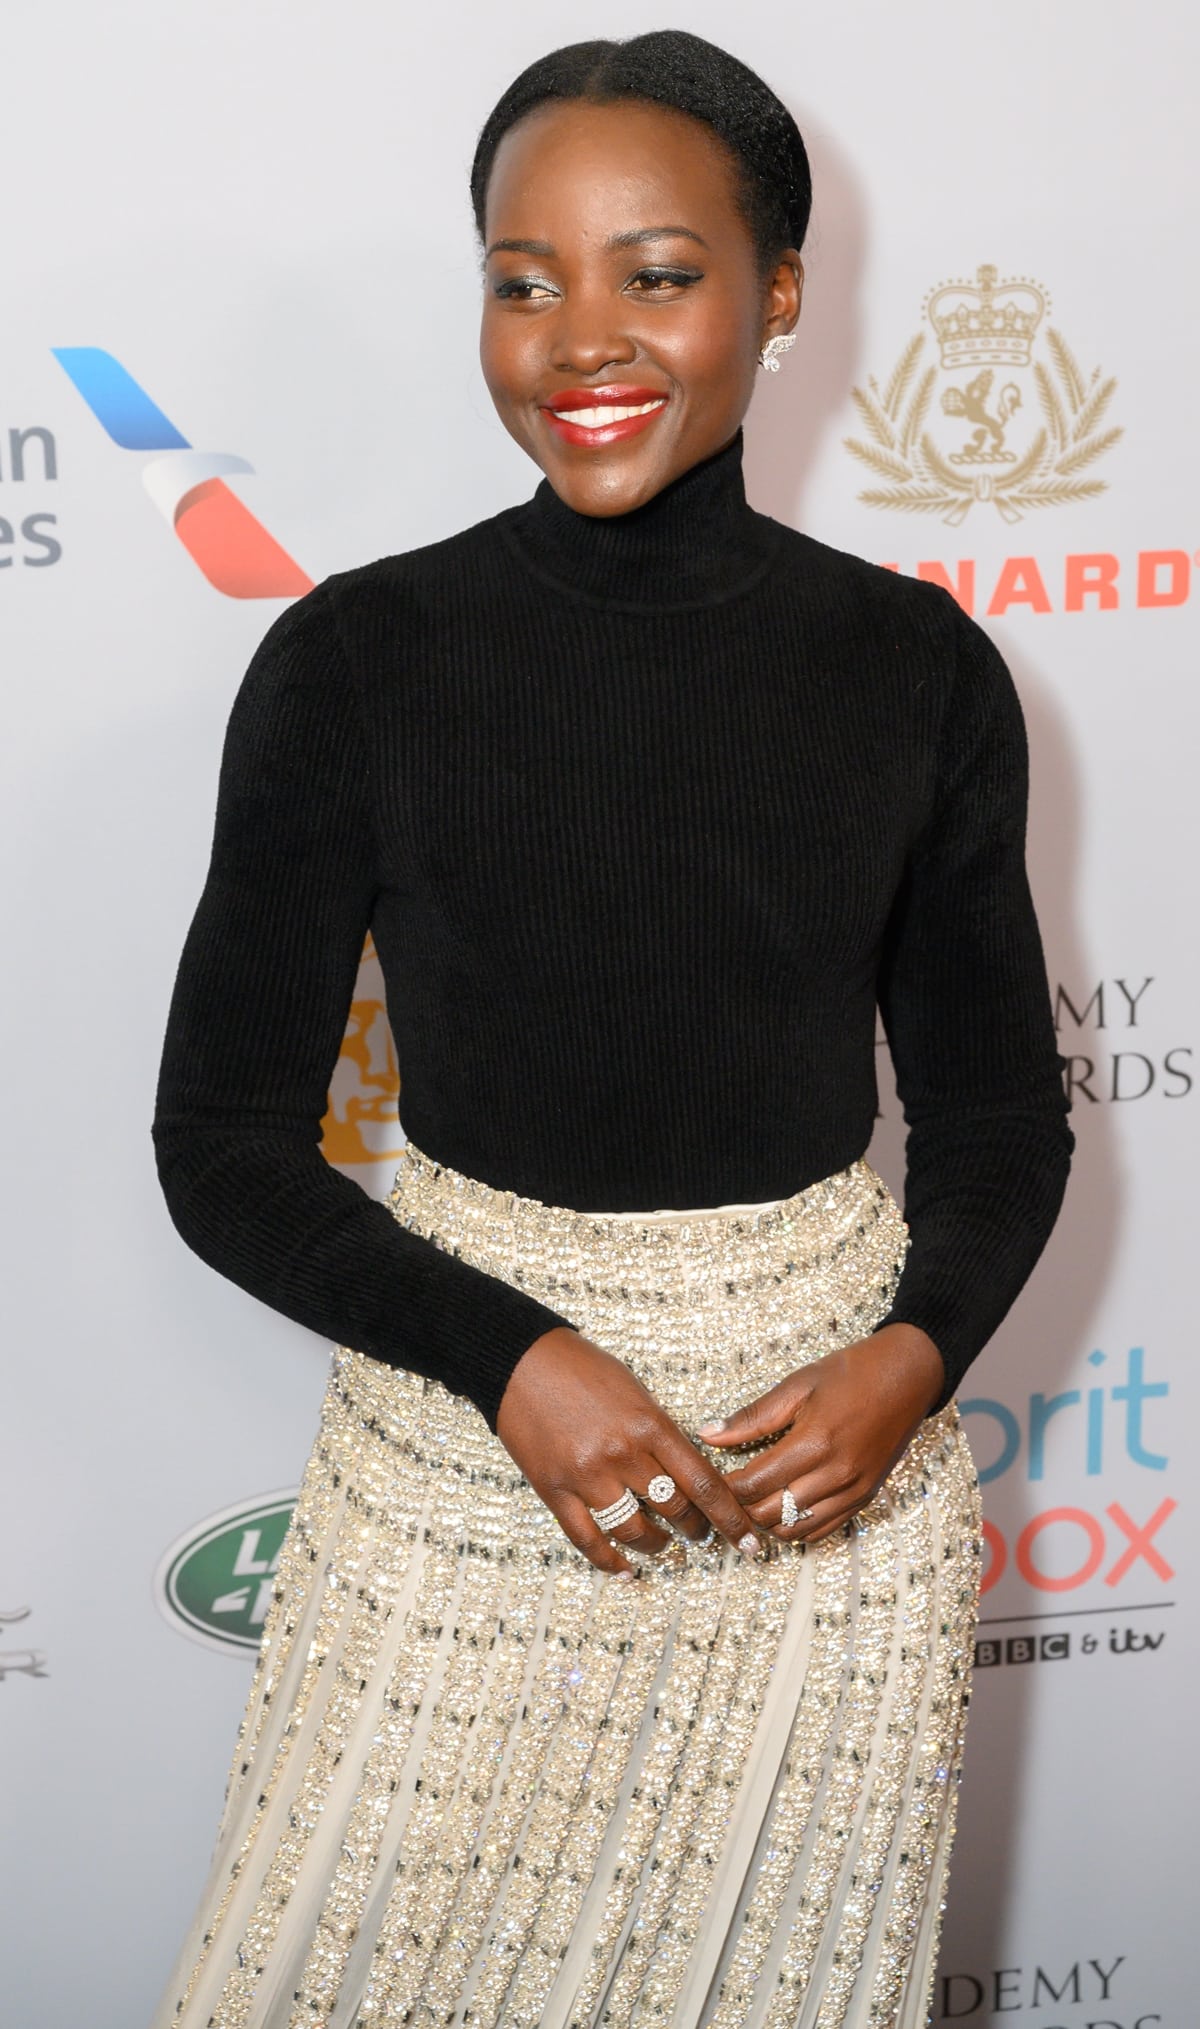 Identifying as Kenyan-Mexican, Lupita Nyong’o was born in Mexico City and holds dual Kenyan and Mexican citizenship